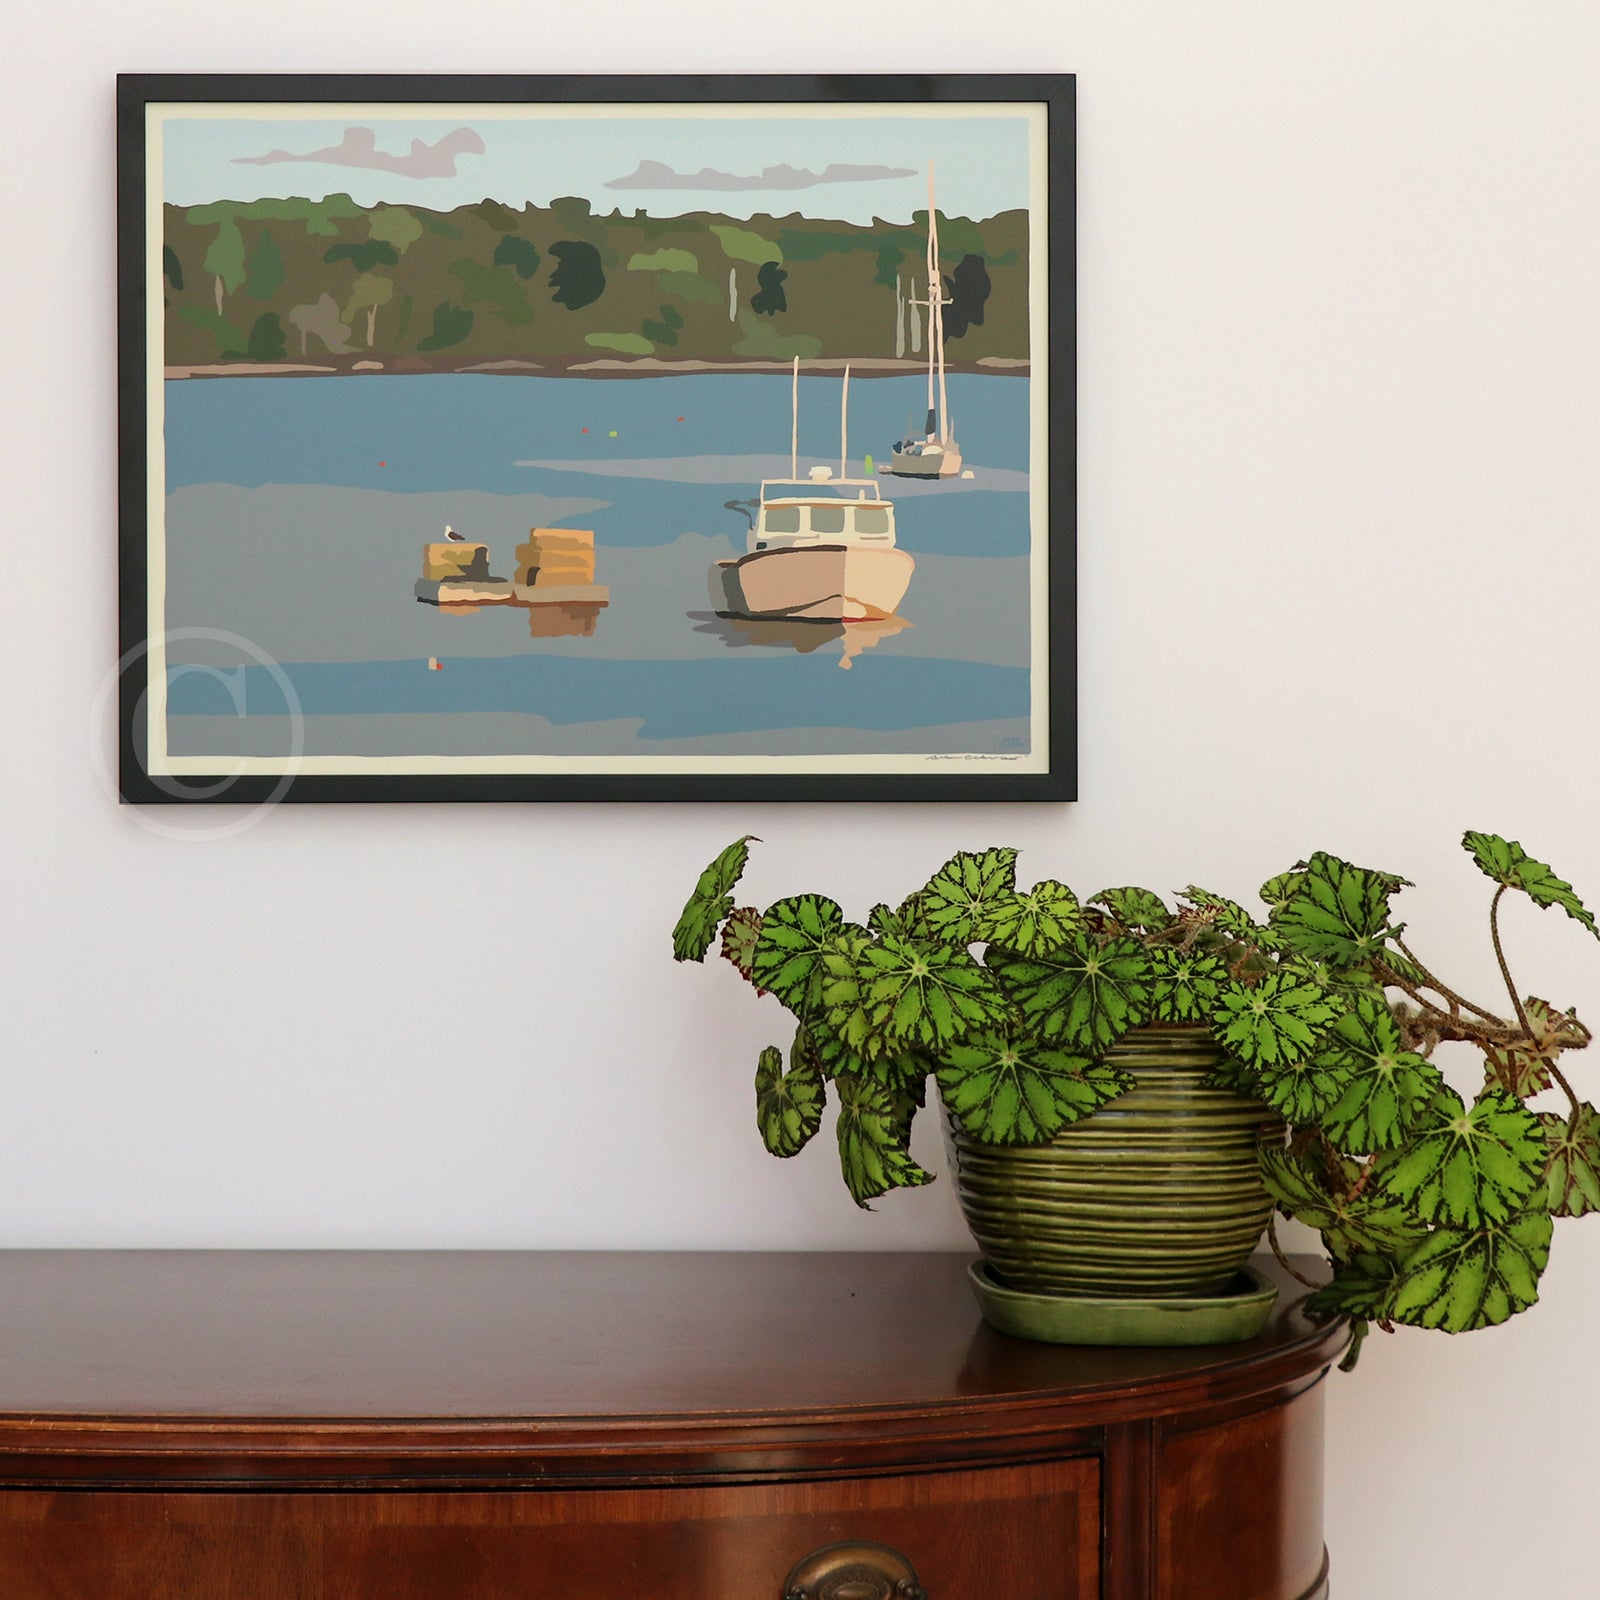 Lobster Boat in Round Pond Harbor Art Print 18" x 24” Horizontal Framed Wall Poster By Alan Claude - Maine